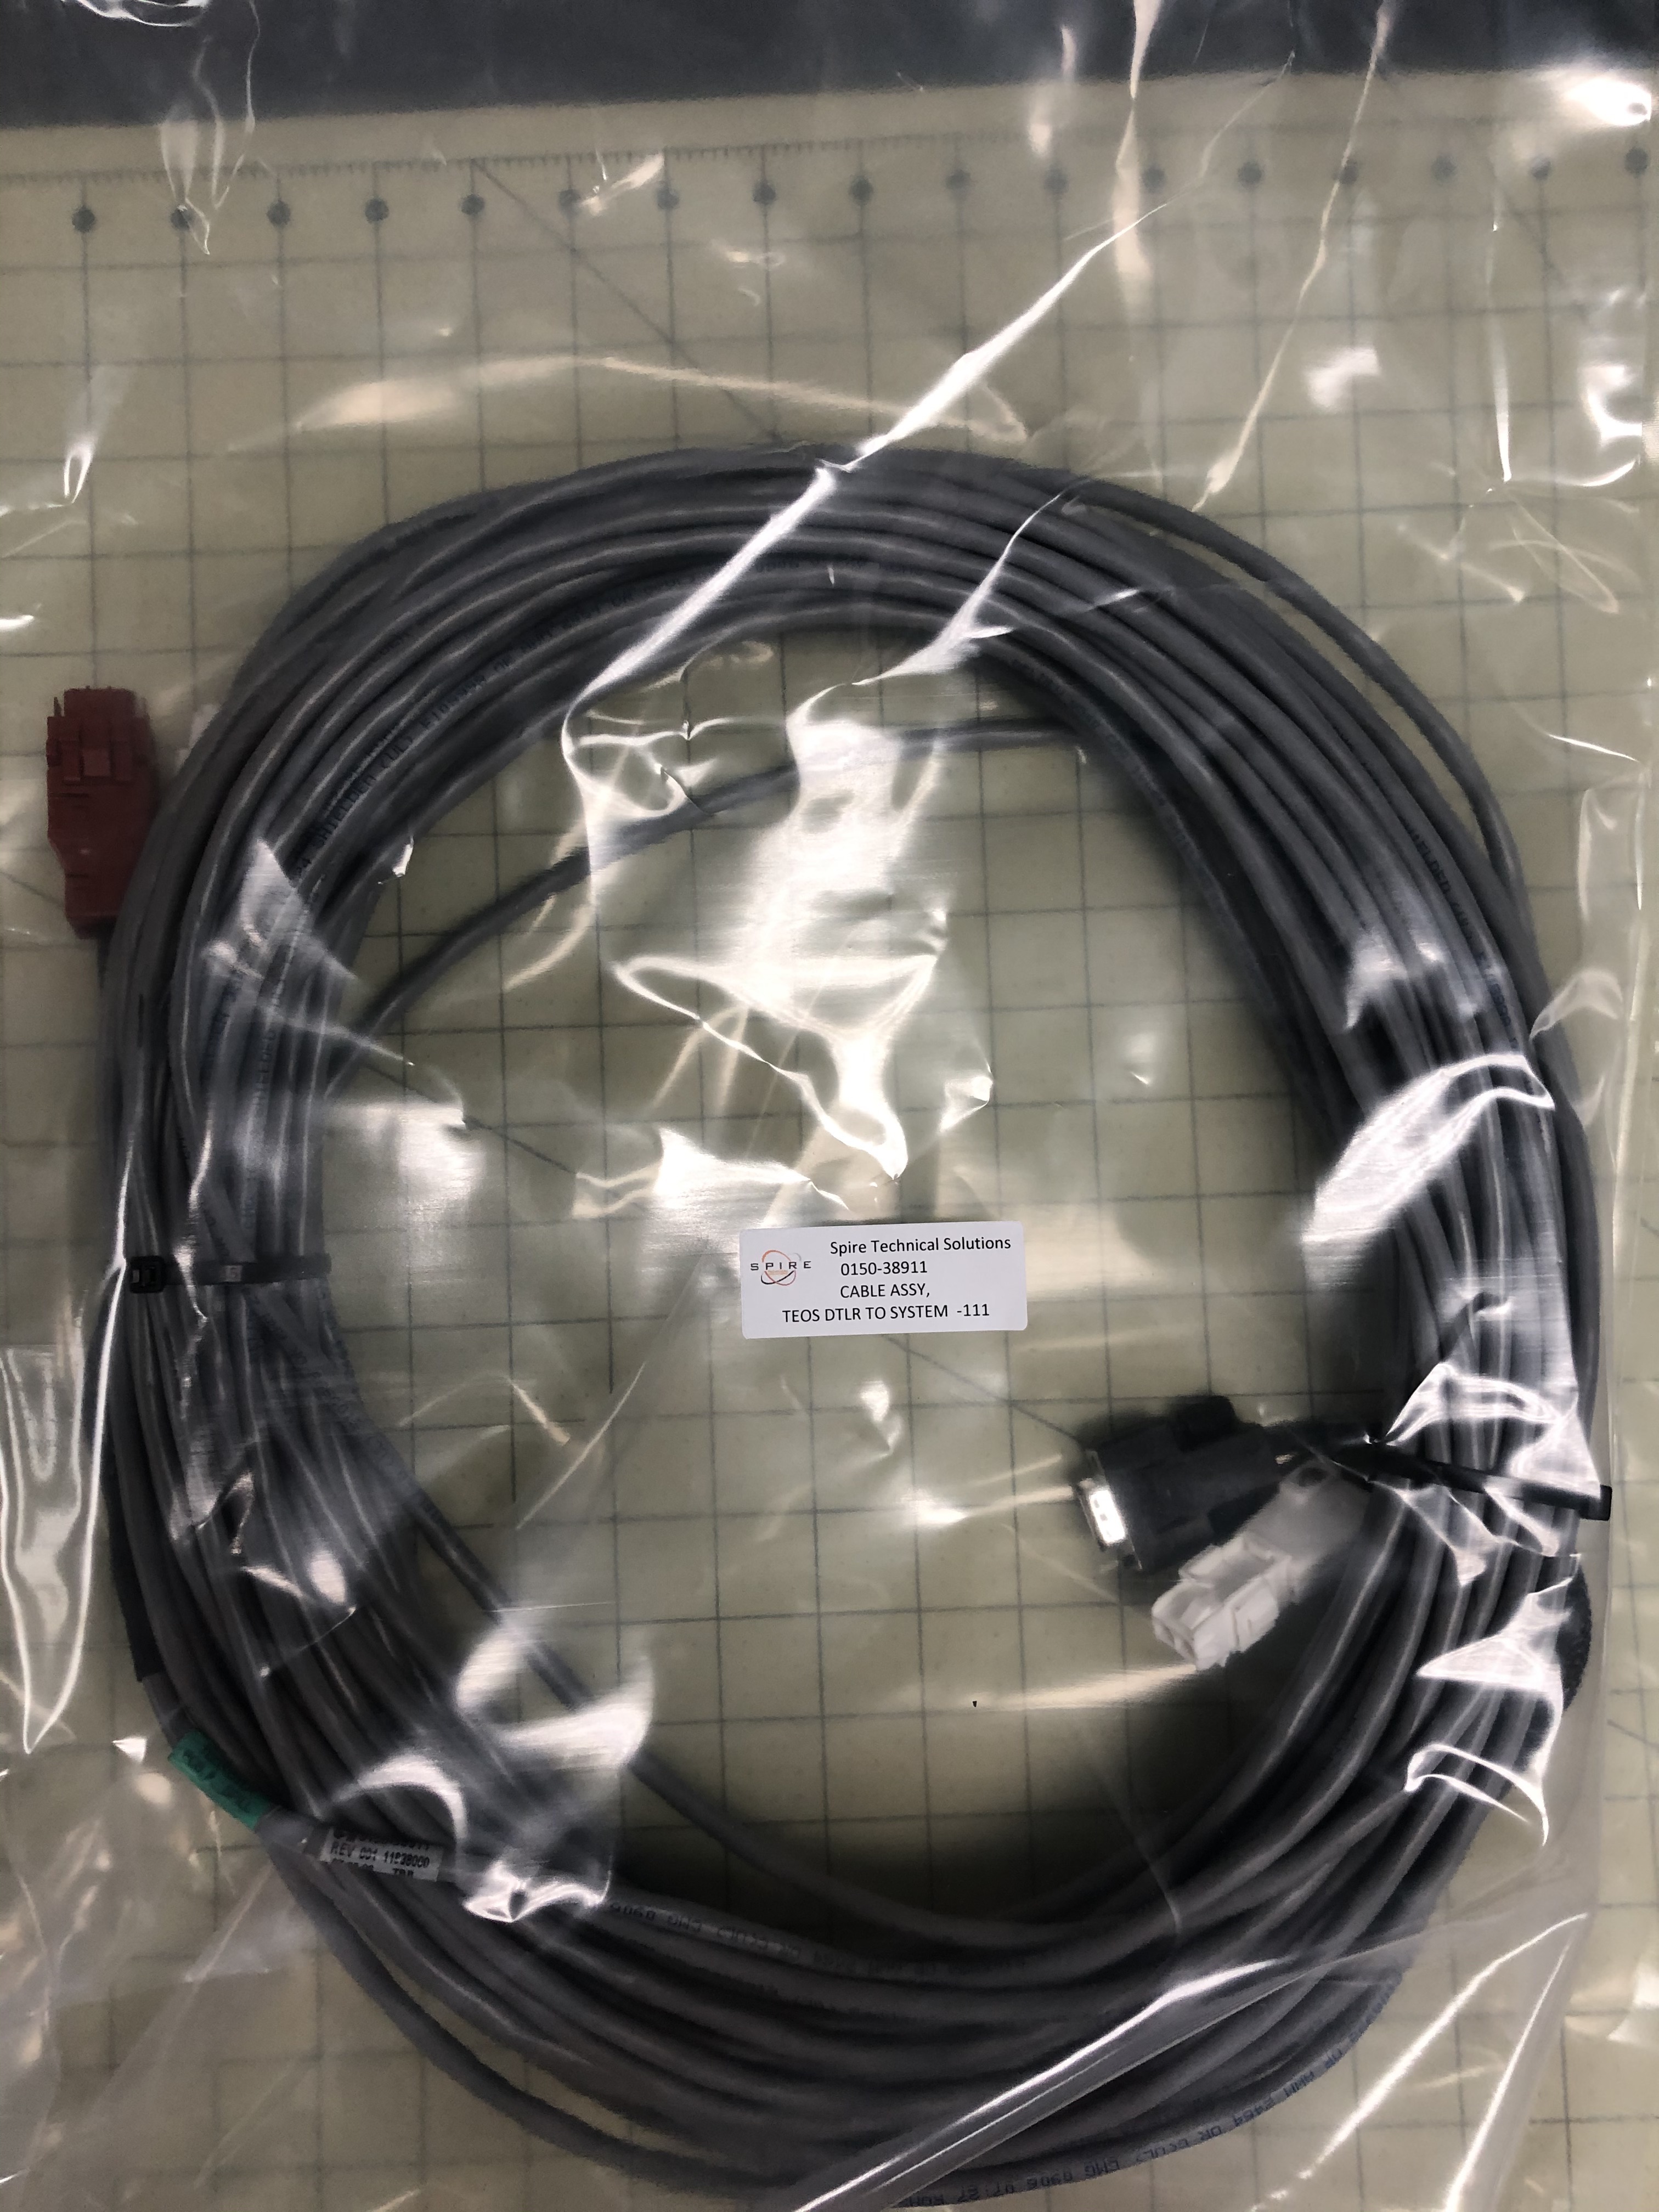 Cable Assy, TEOS DTLR to System